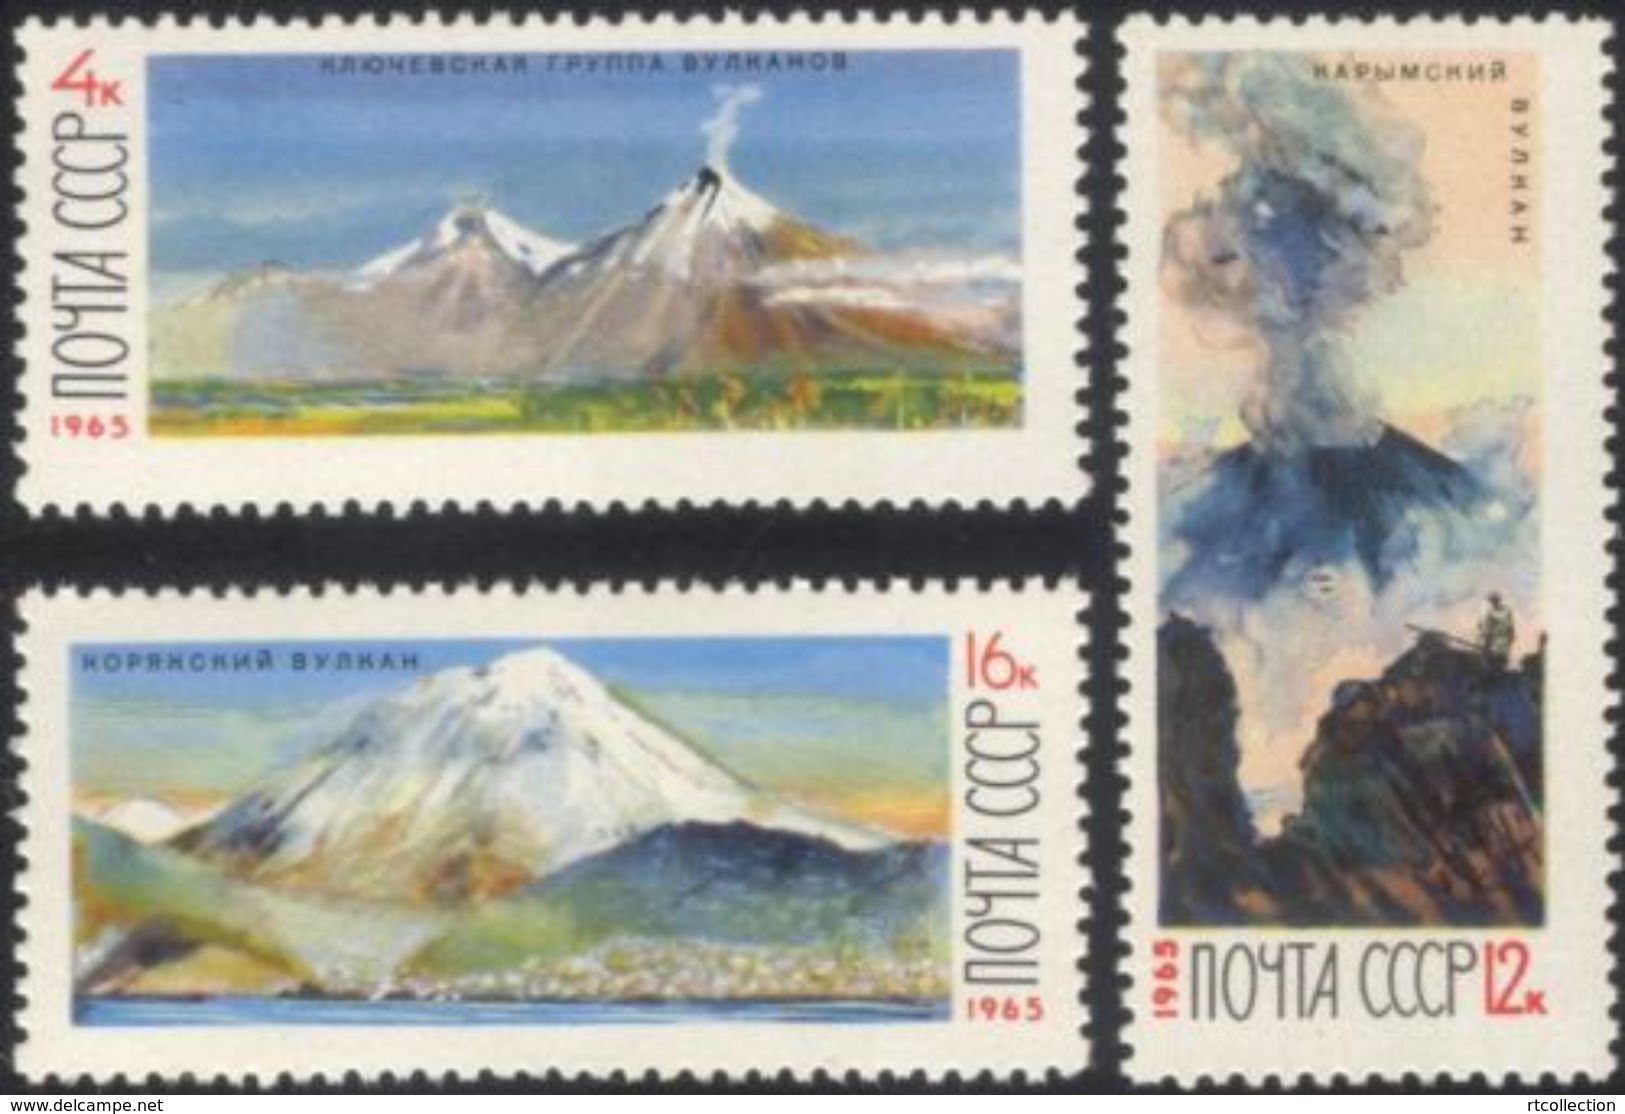 USSR Russia 1965 Volcanos Of Kamchatka Nature Kluchevsky Volcano Geology Geography Places Stamps MNH Michel 3138-3140 - Volcanos